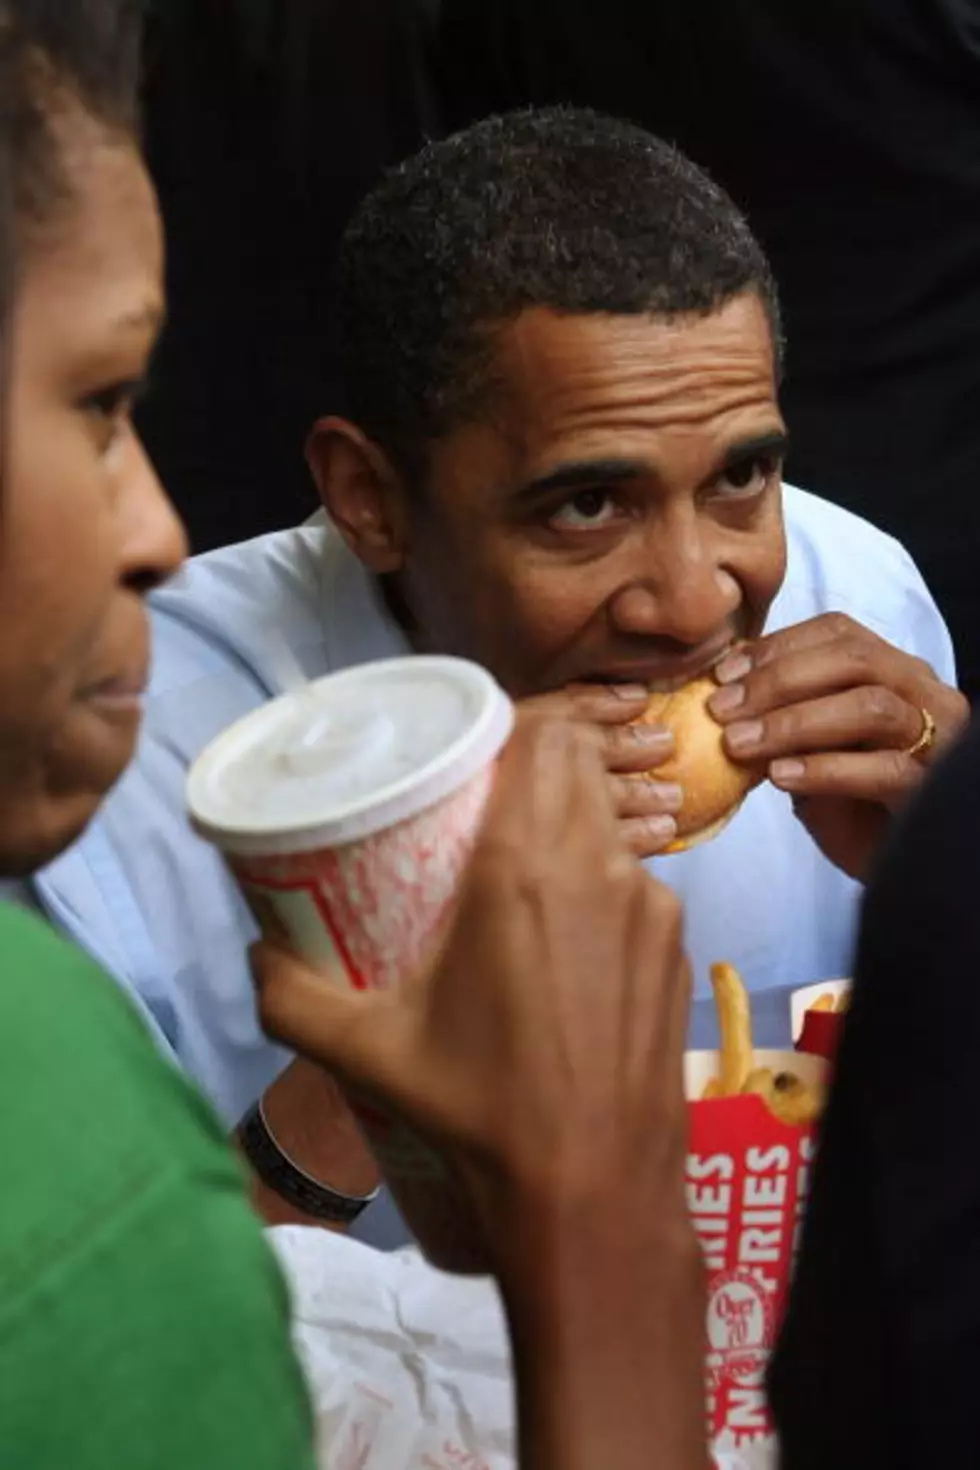 Obama Issues New Nutrition Standards